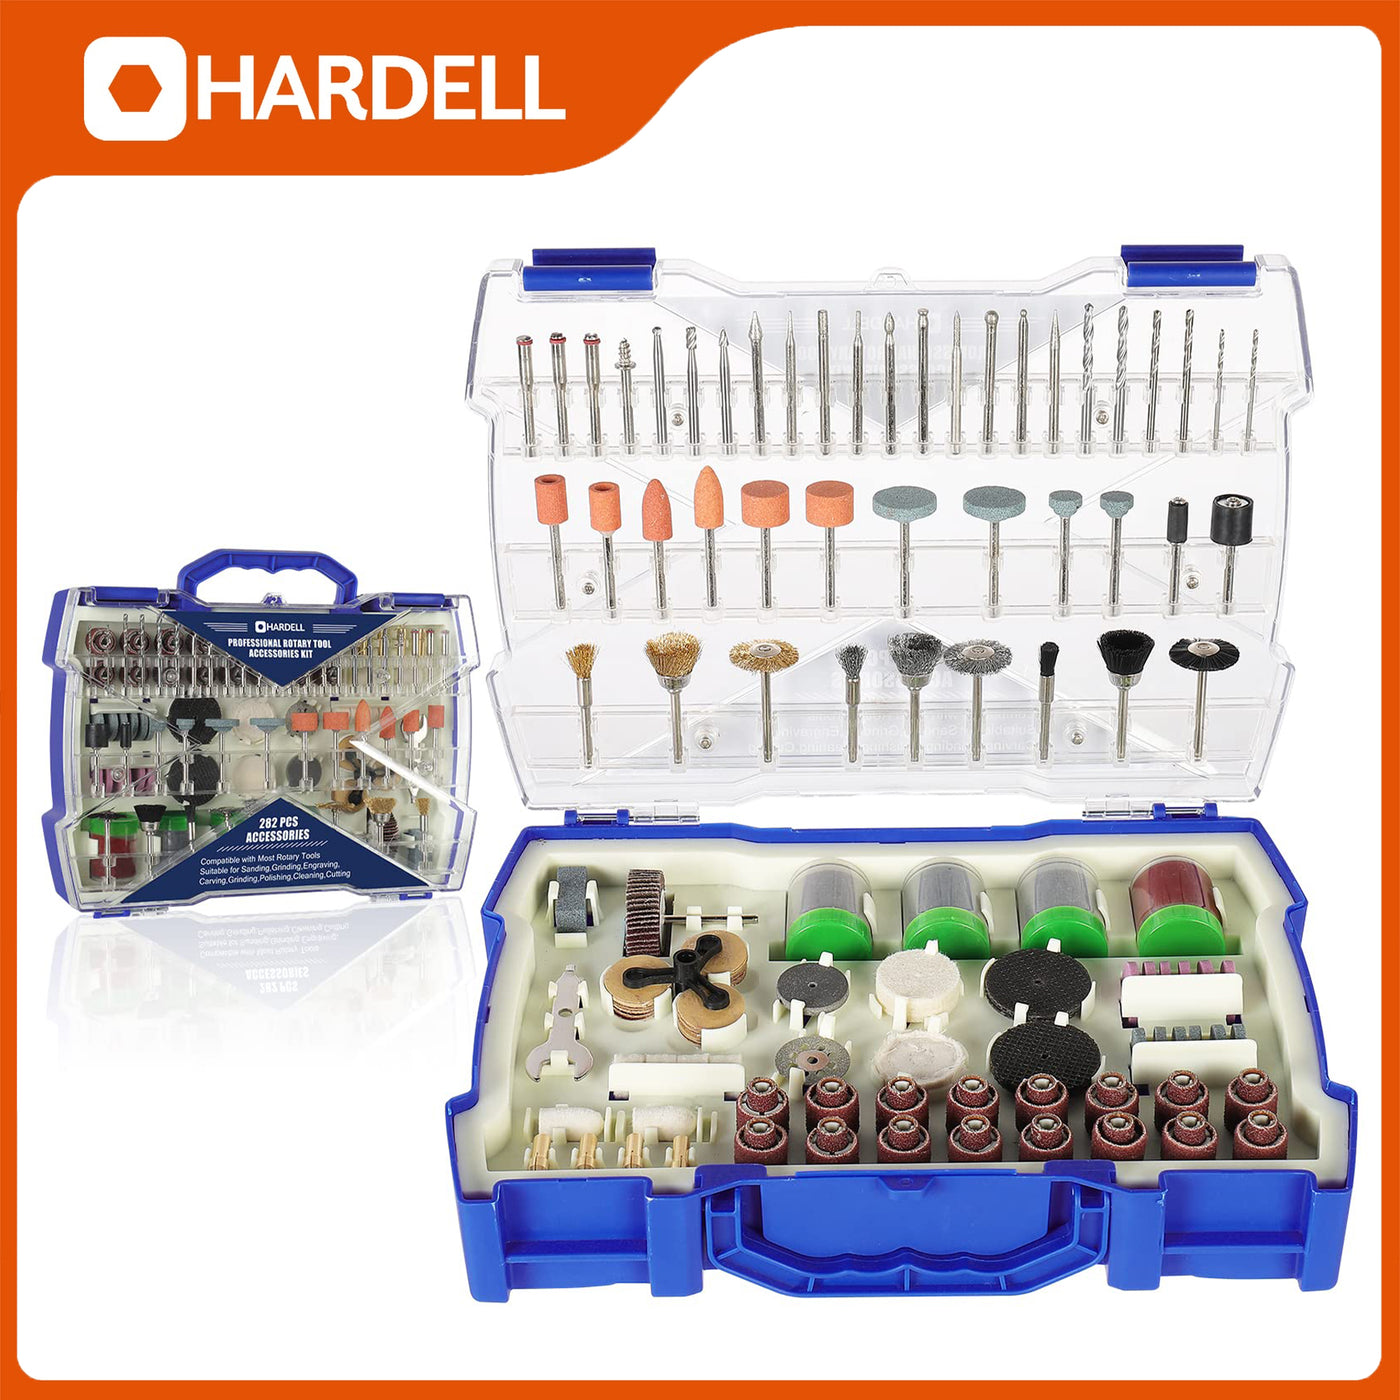 HARDELL Rotary Tool Accessories Kit 282 Pcs, Power Rotary Tool Bits 1/8''(3.2mm) Diameter Shanks Universal Fitment for Easy Cutting, SA